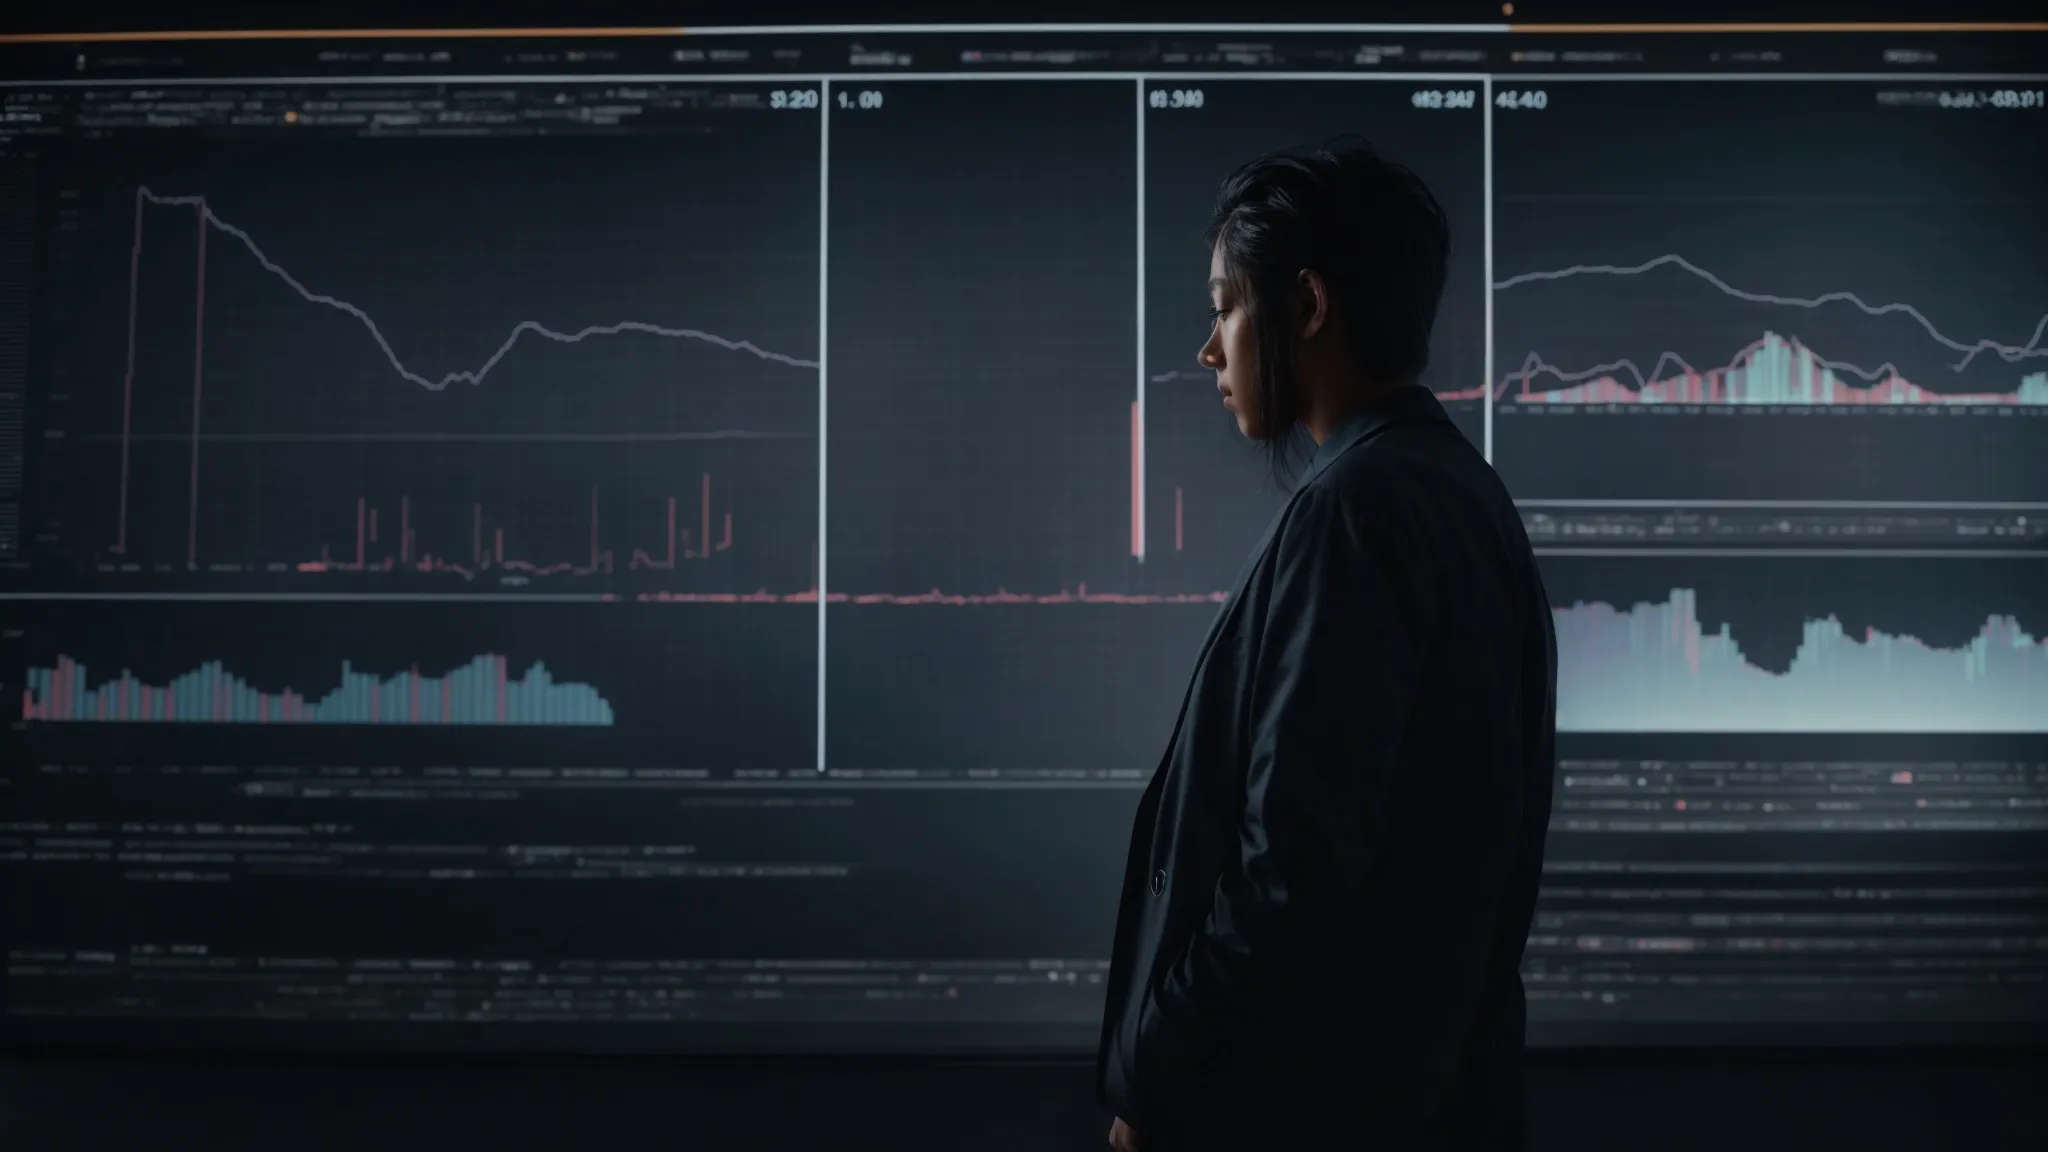 a person looking thoughtfully at a large screen displaying various analytics and graphs.